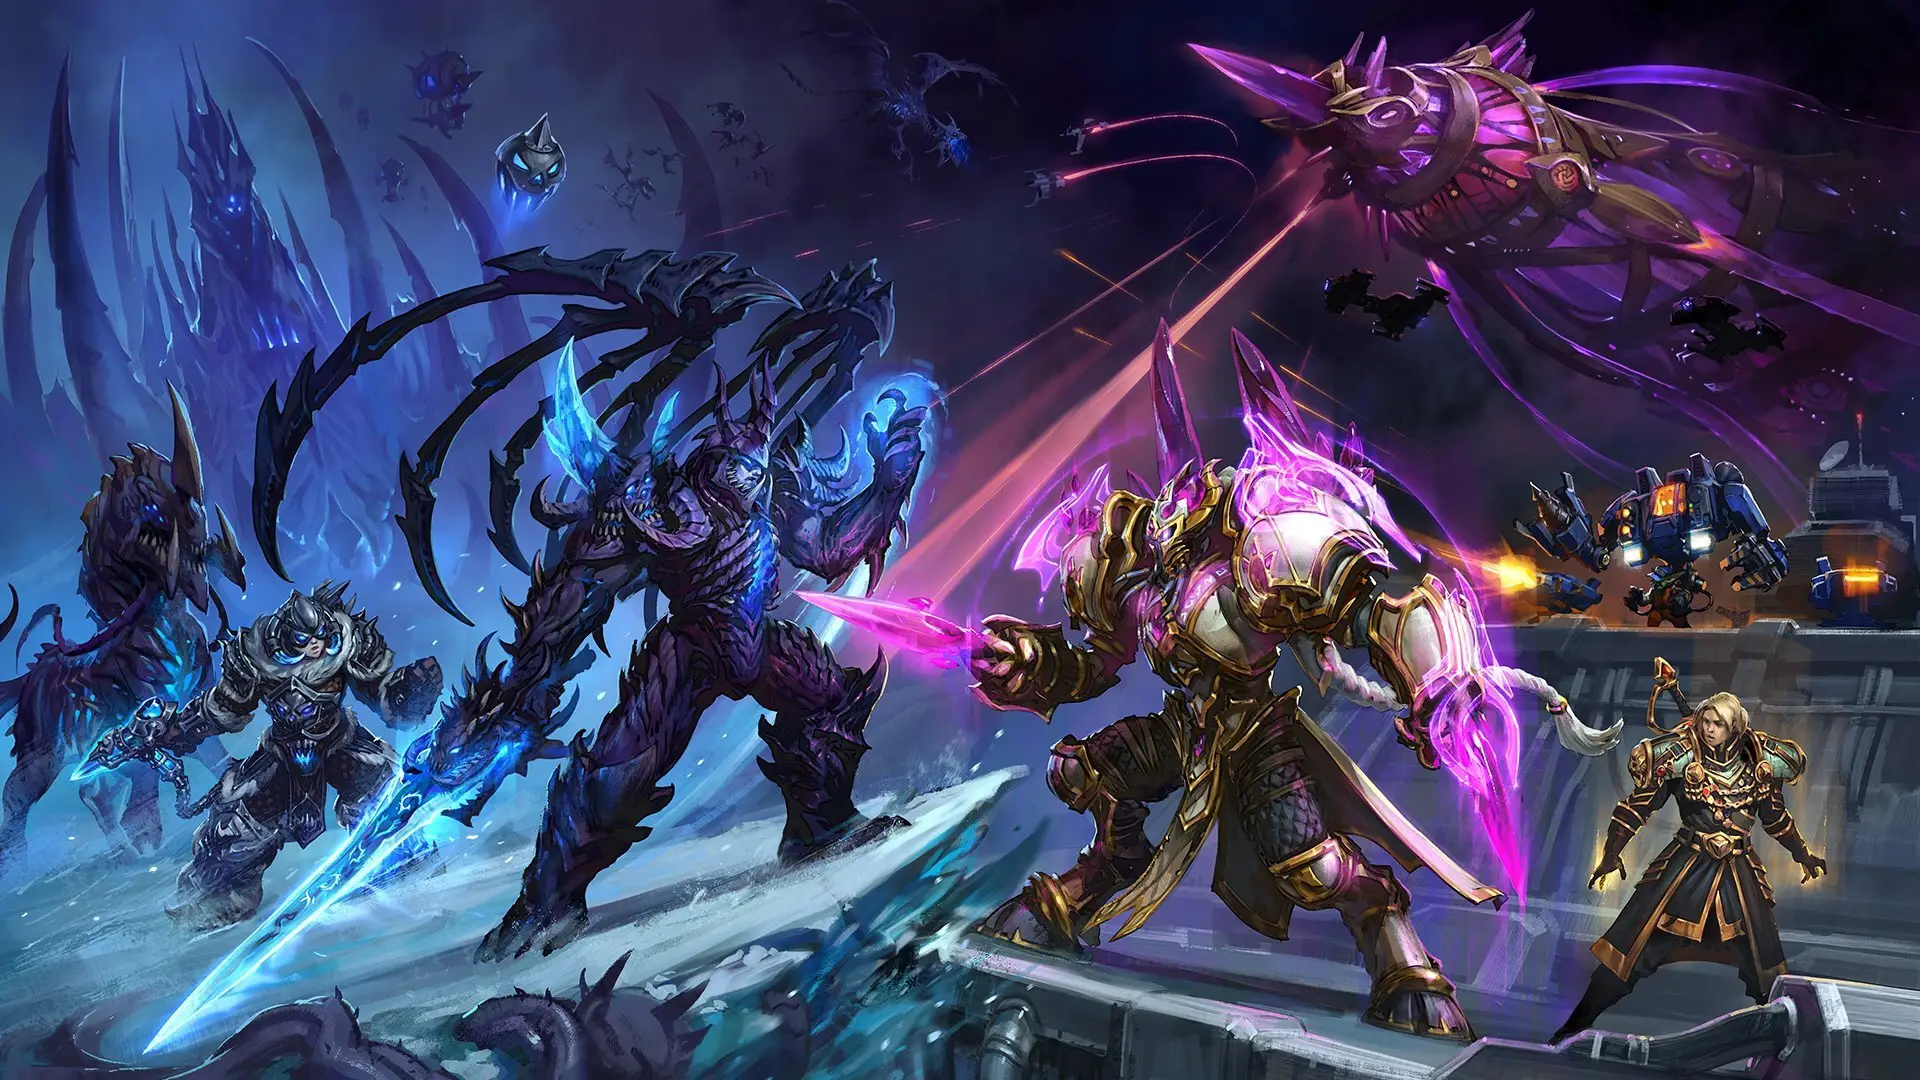 Could Heroes of the Storm Make a Comeback? The Community Speculates